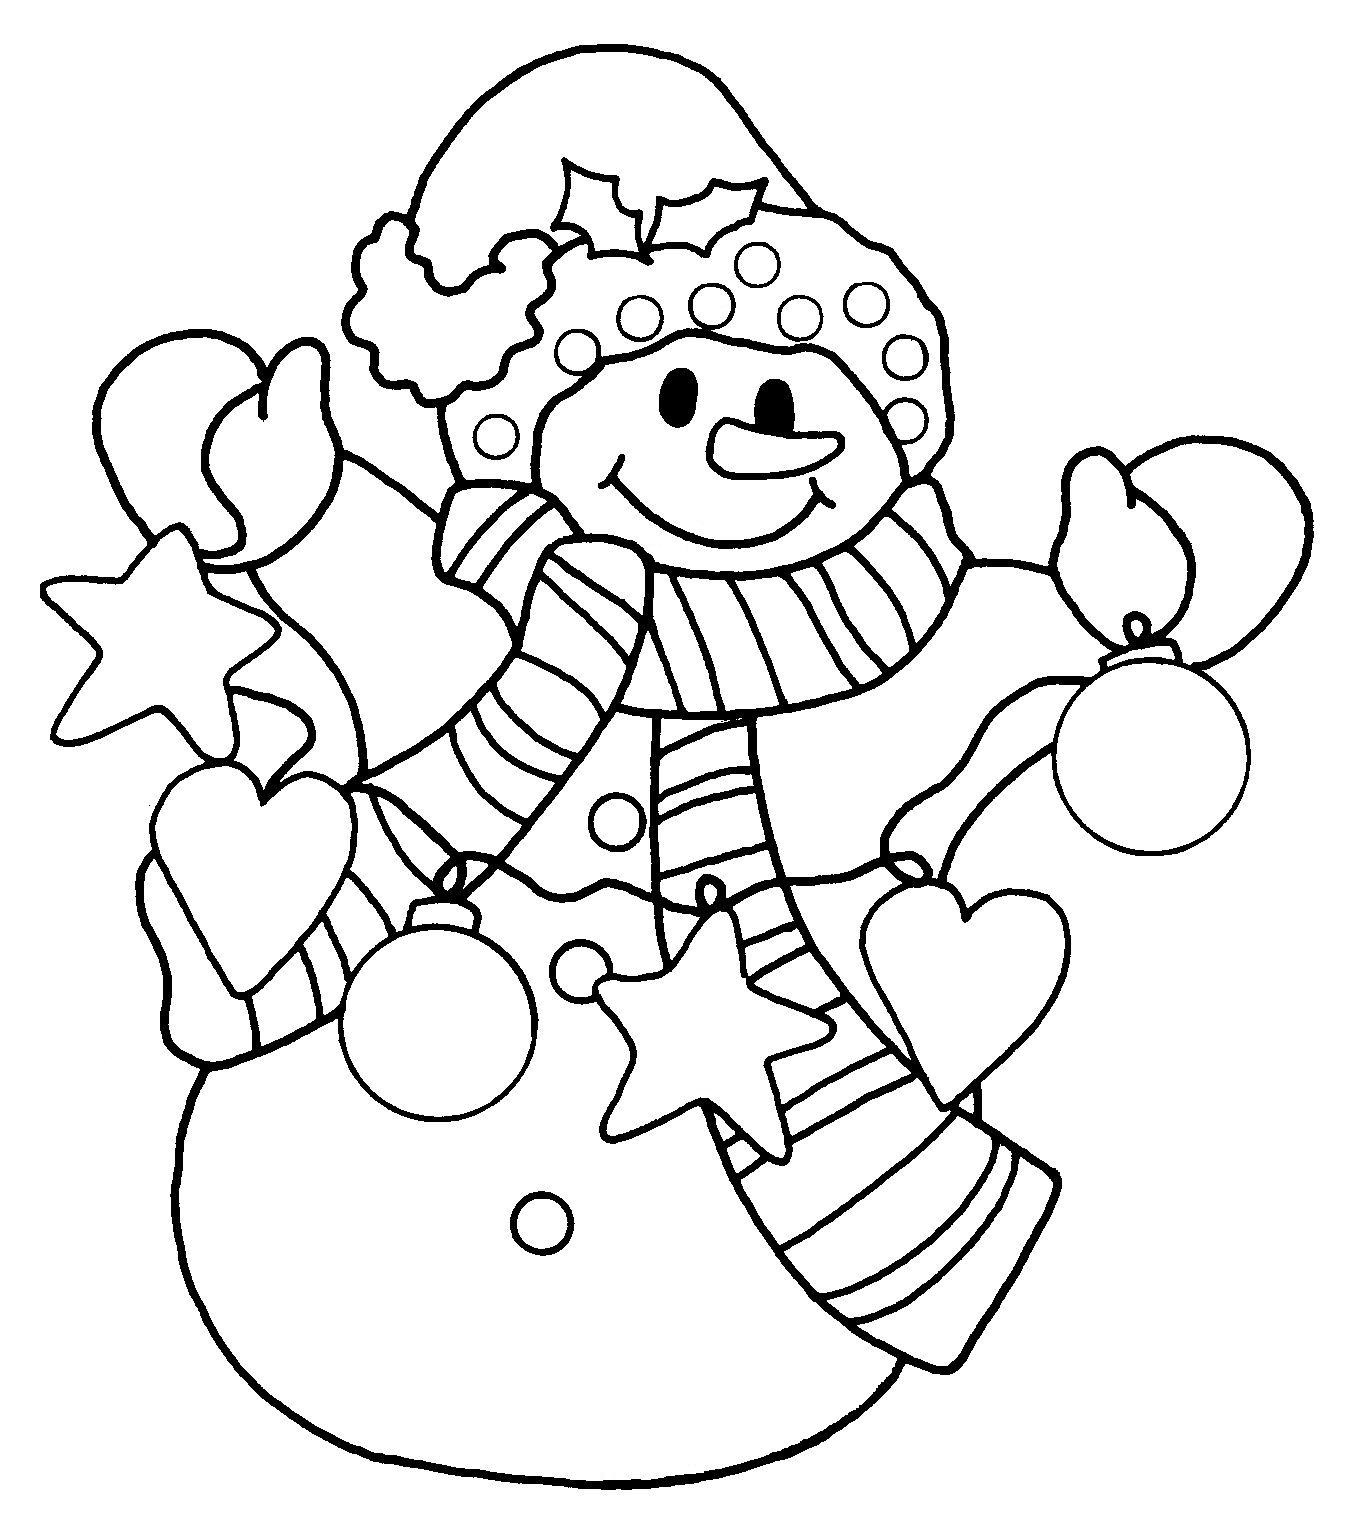 Christmas Coloring Pages For Toddlers
 DZ Doodles Digital Stamps Oodles of Doodles News Freebie